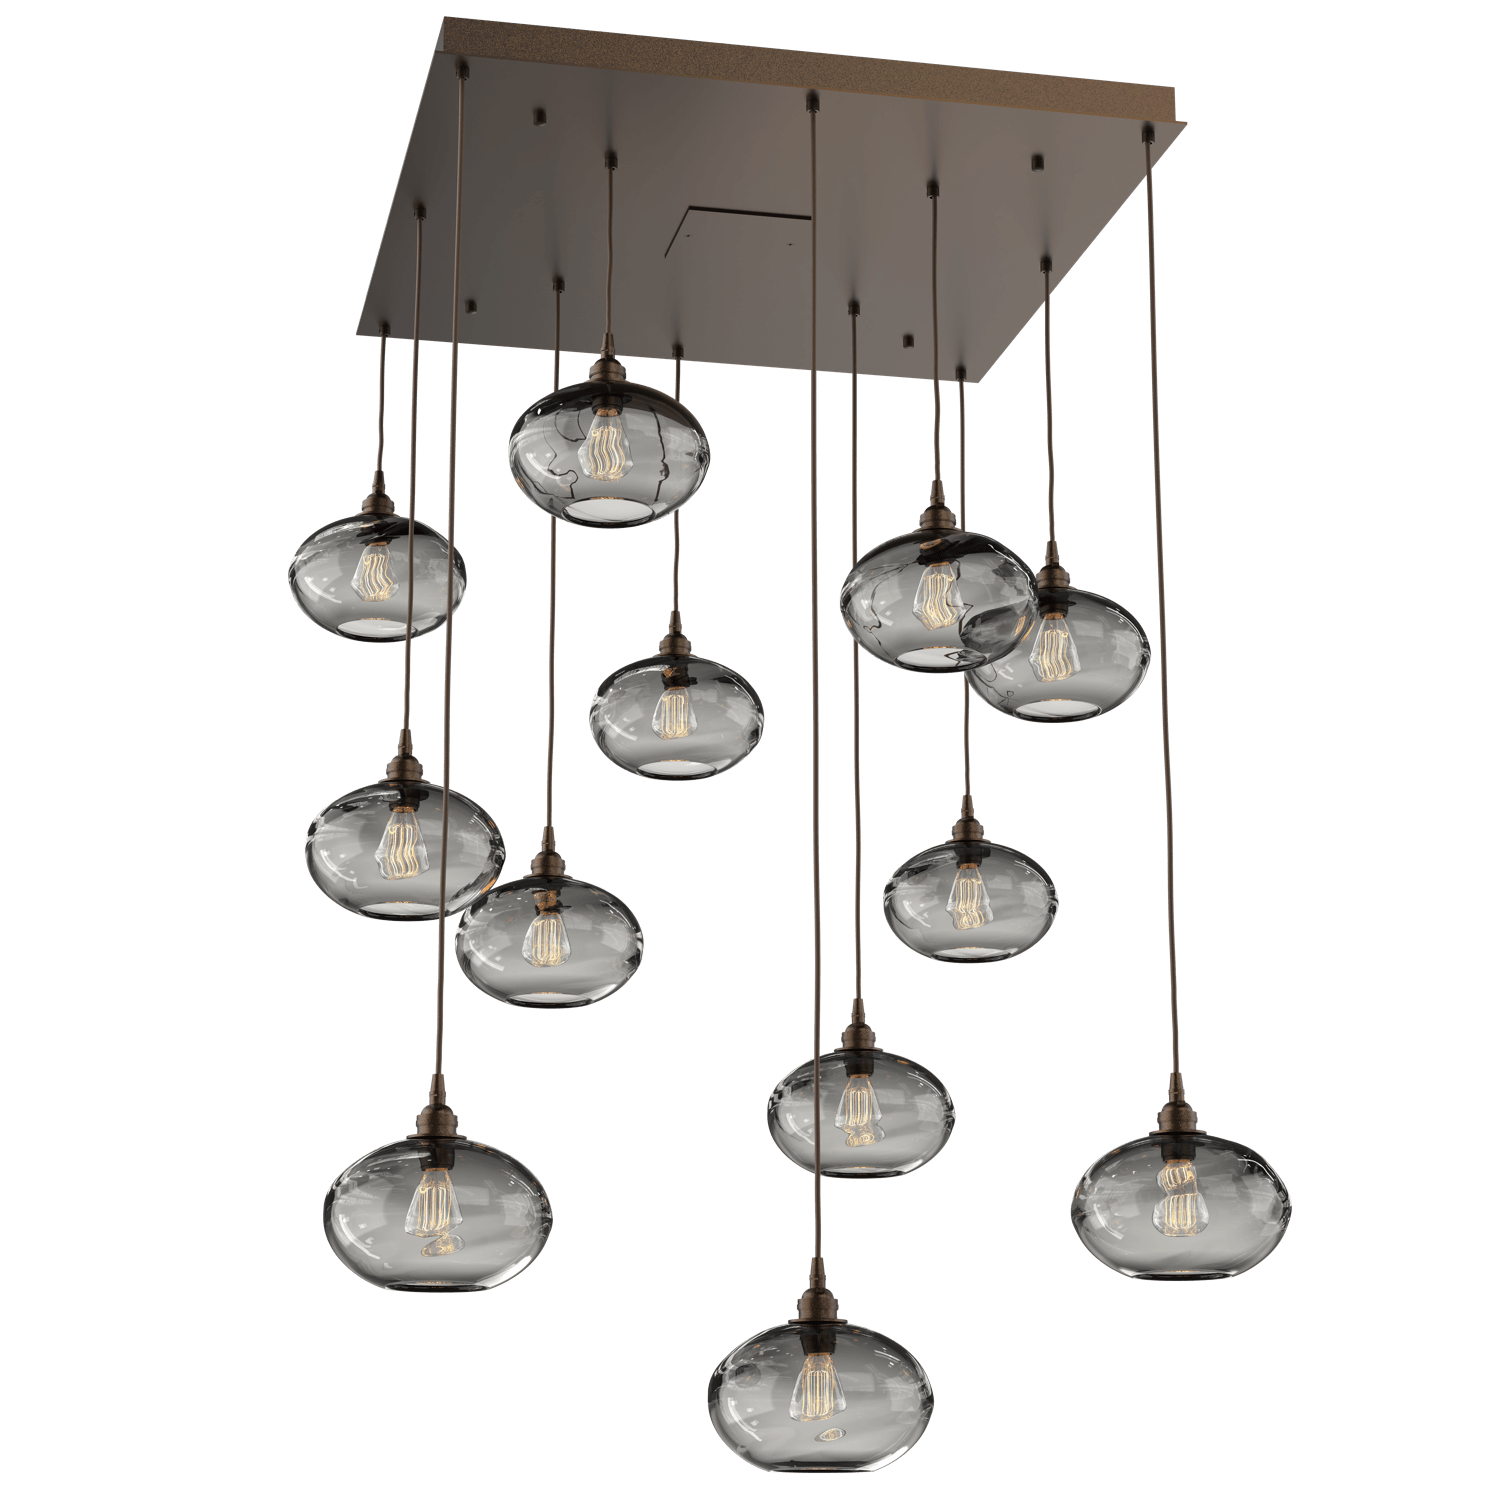 CHB0036-12-FB-OS-Hammerton-Studio-Optic-Blown-Glass-Coppa-12-light-square-pendant-chandelier-with-flat-bronze-finish-and-optic-smoke-blown-glass-shades-and-incandescent-lamping